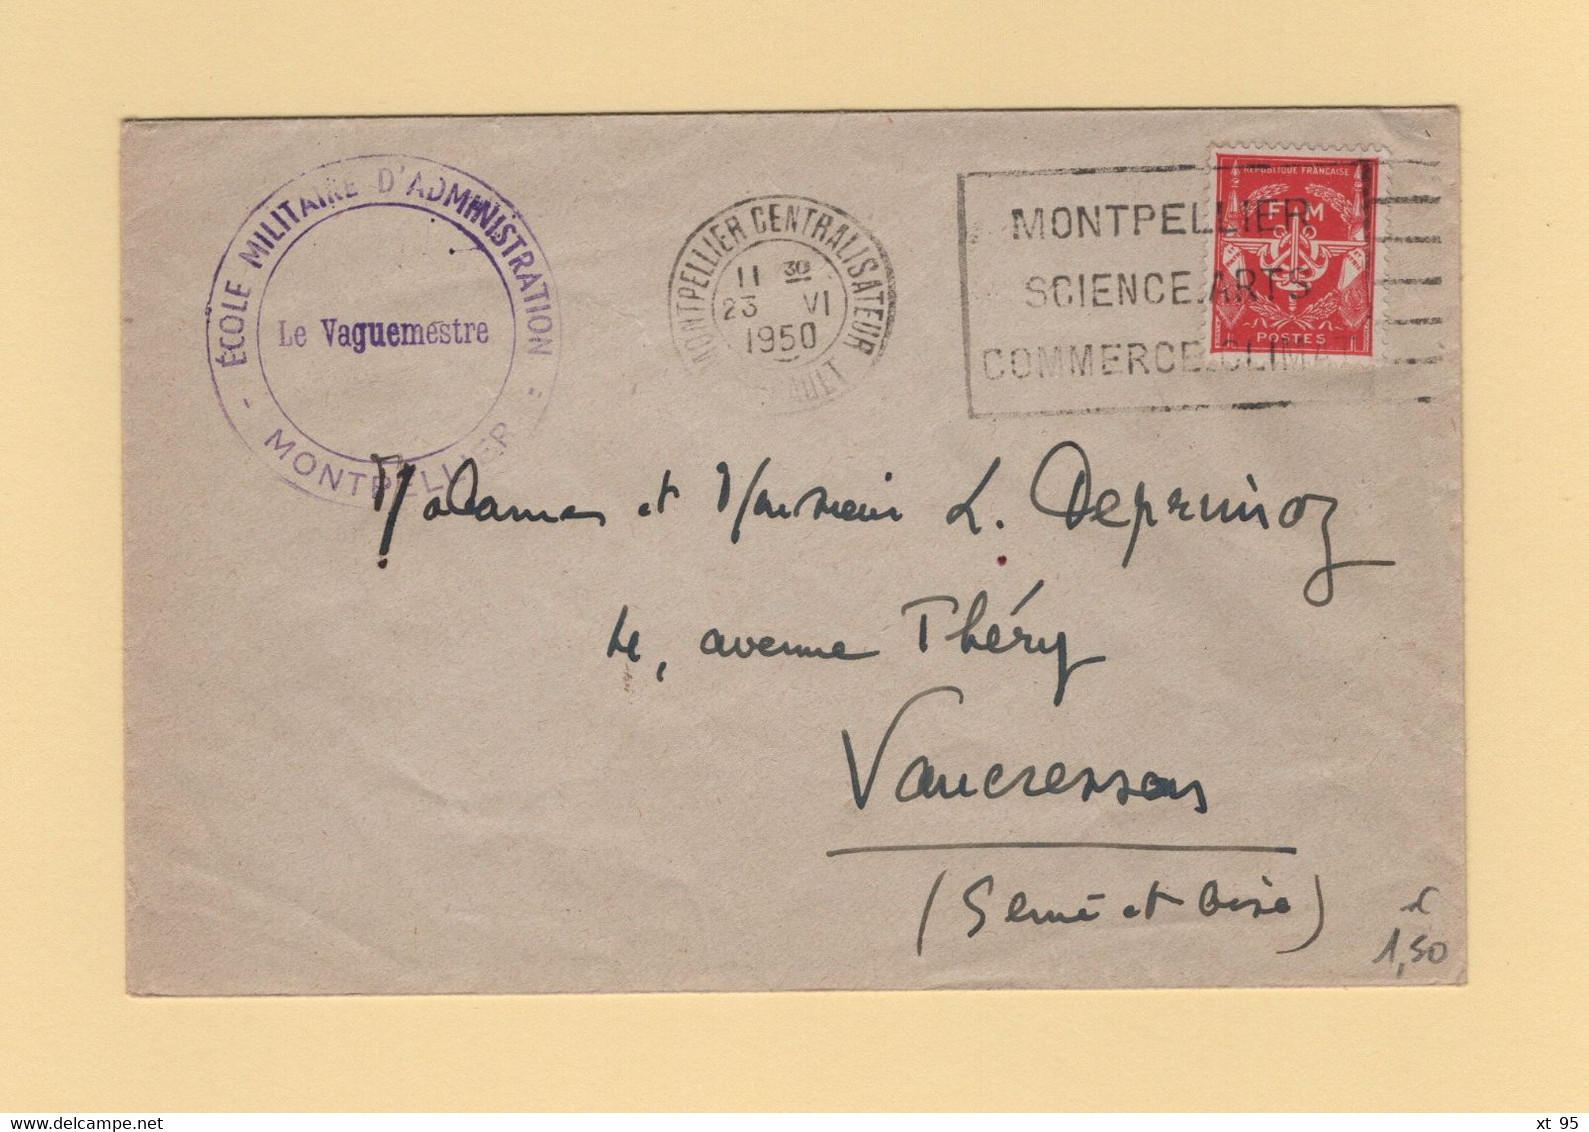 Timbre FM - Montpellier - Ecole Militaire D Administration - Herault - 1950 - Military Postage Stamps